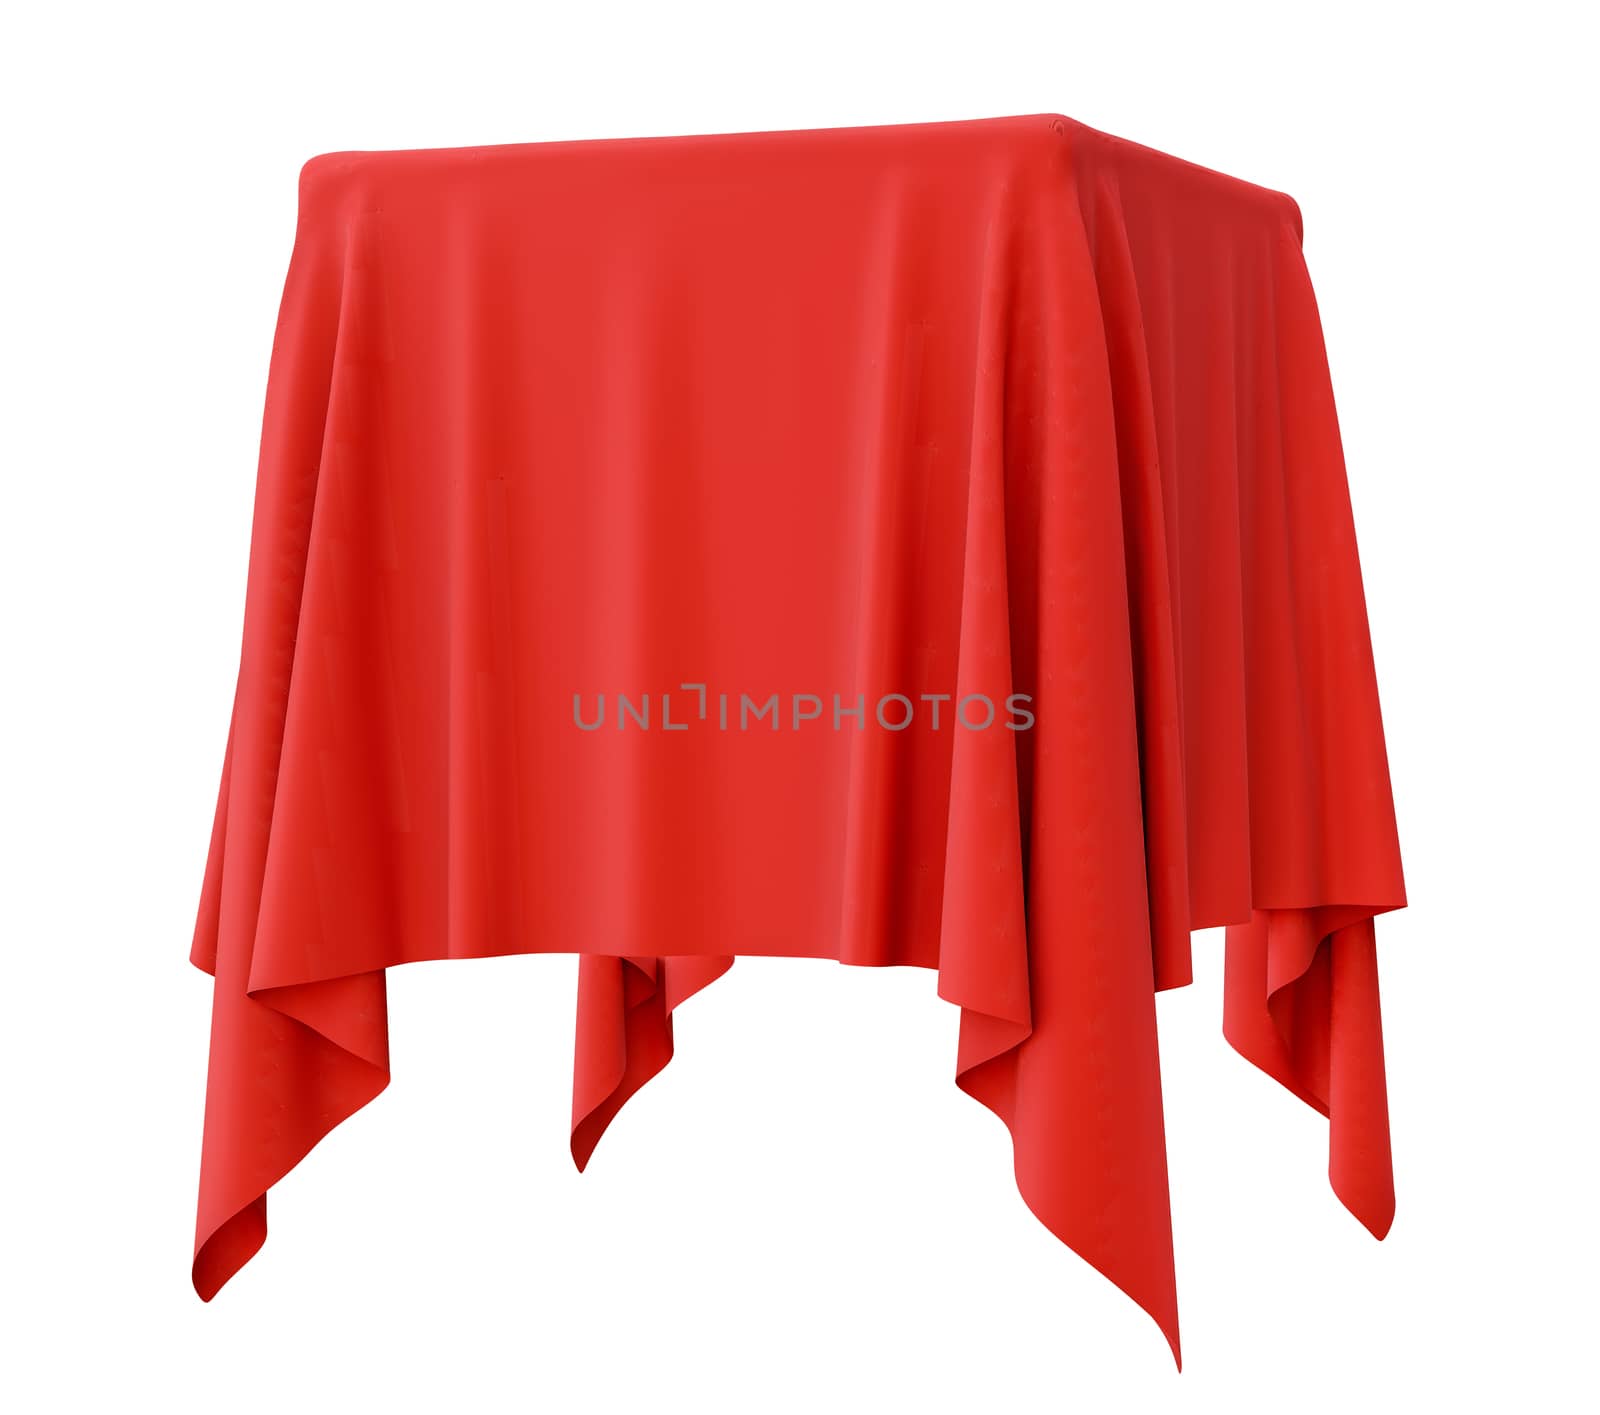 Red cloth on a square pedestal, isolated on white. 3d illustration